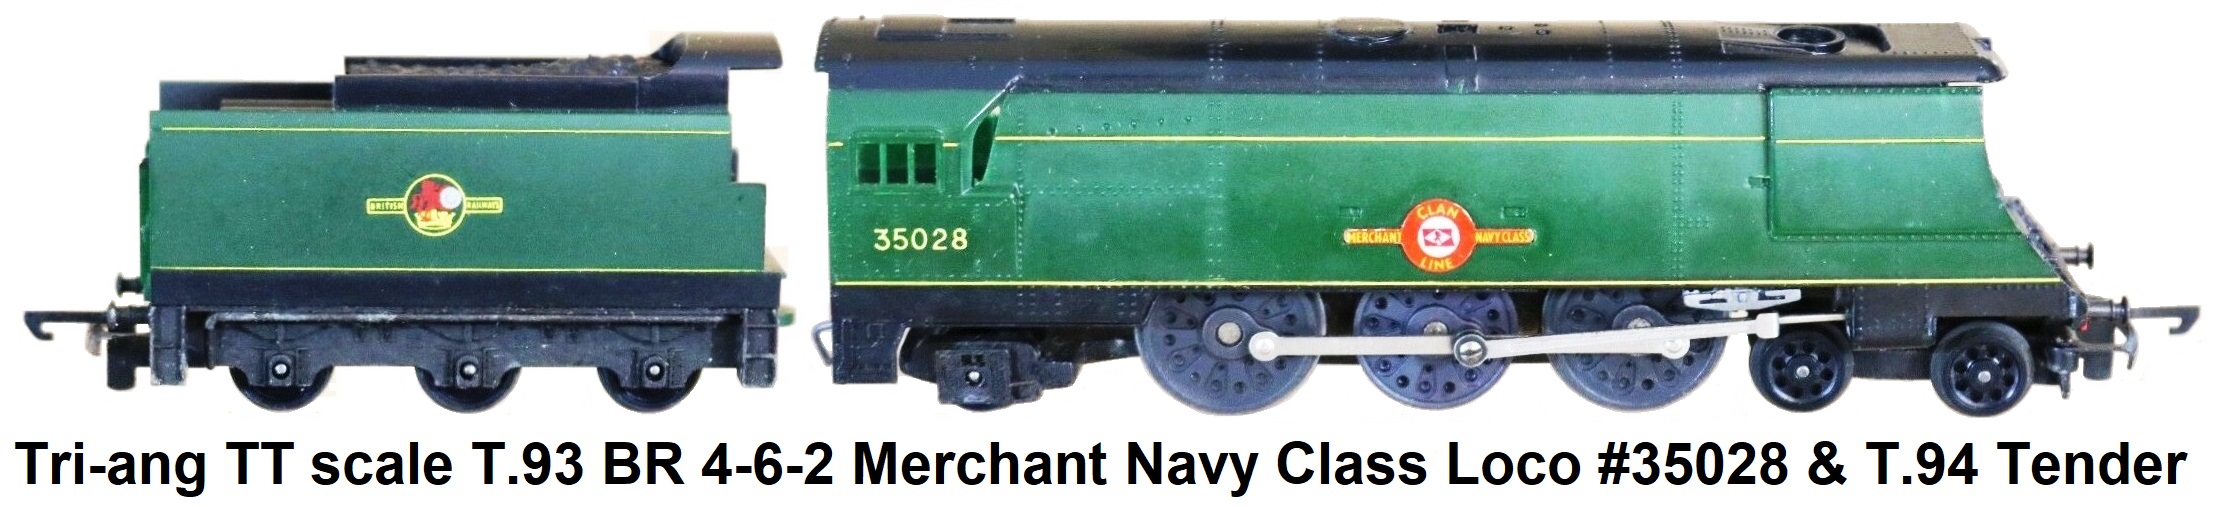 Tri-ang Railways TT scale T.93 BR 4-6-2 Merchant Navy Class Loco #35028 and T.94 tender